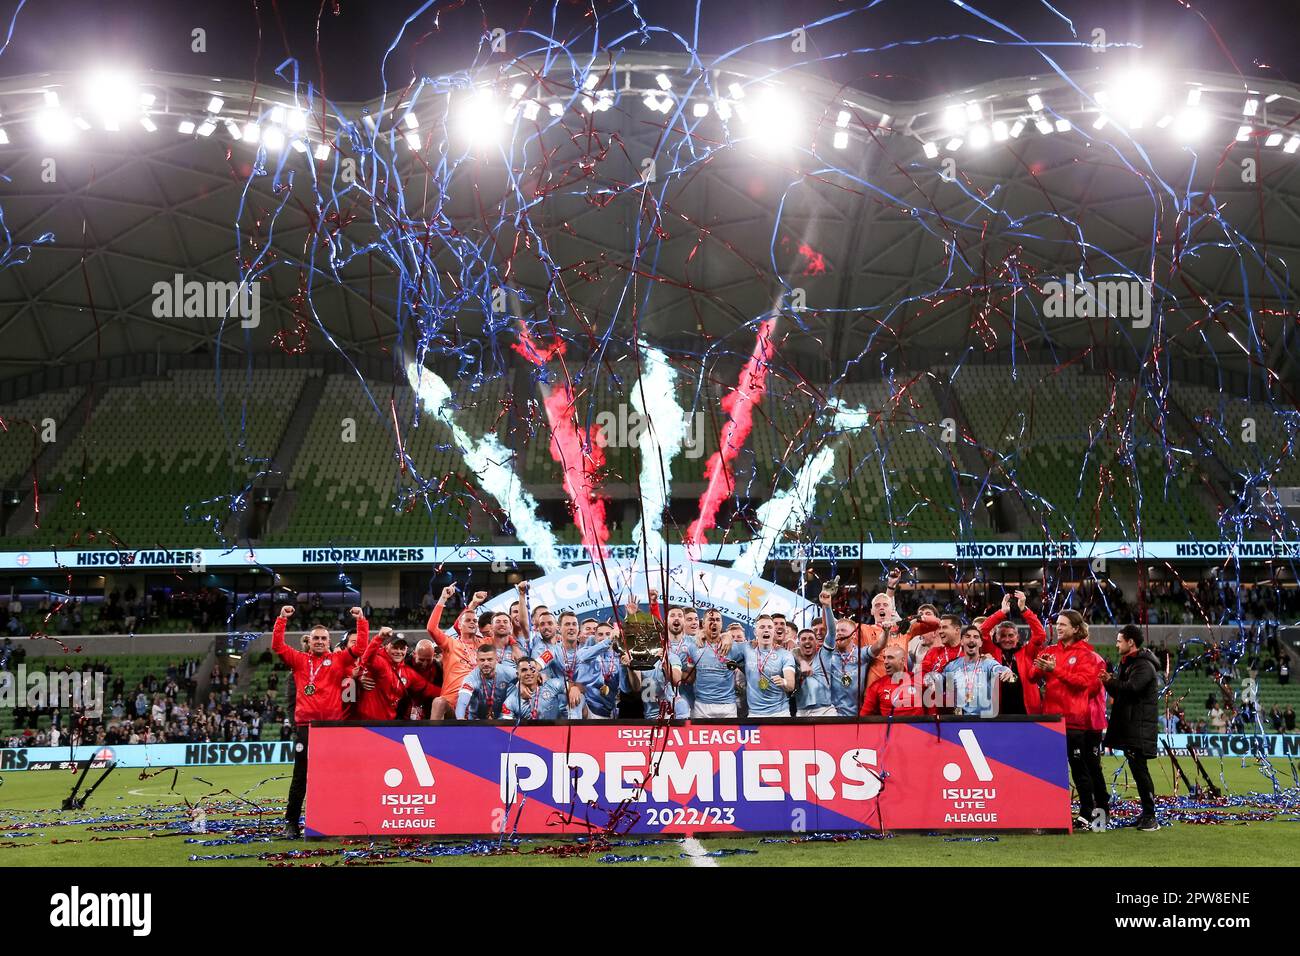 Melbourne, Australia, 28 April, 2023. Melbourne City celebrate with their Premiers Plate after winning three consecutive Premierships during the A-League Men's football match between Melbourne City and Western Sydney Wanderers at AAMI Park on April 28, 2023 in Melbourne, Australia. Credit: Dave Hewison/Alamy Live News Stock Photo